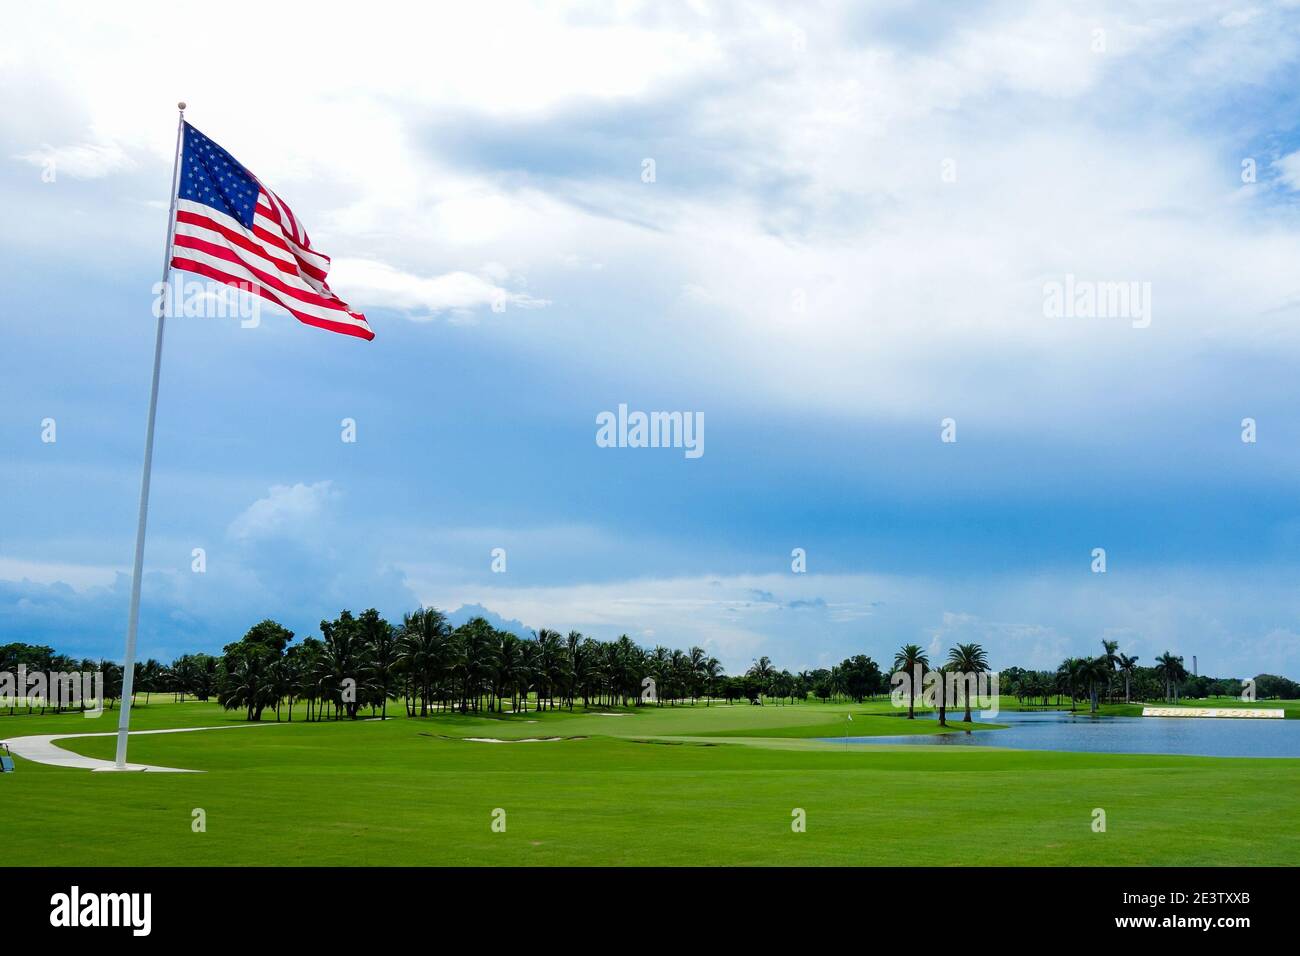 United States, Miami, Hotel Trump National Doral Golf Resort. Luxury hotel for celebrities, wealthy people and top athletes like golfers. Golf with am Stock Photo